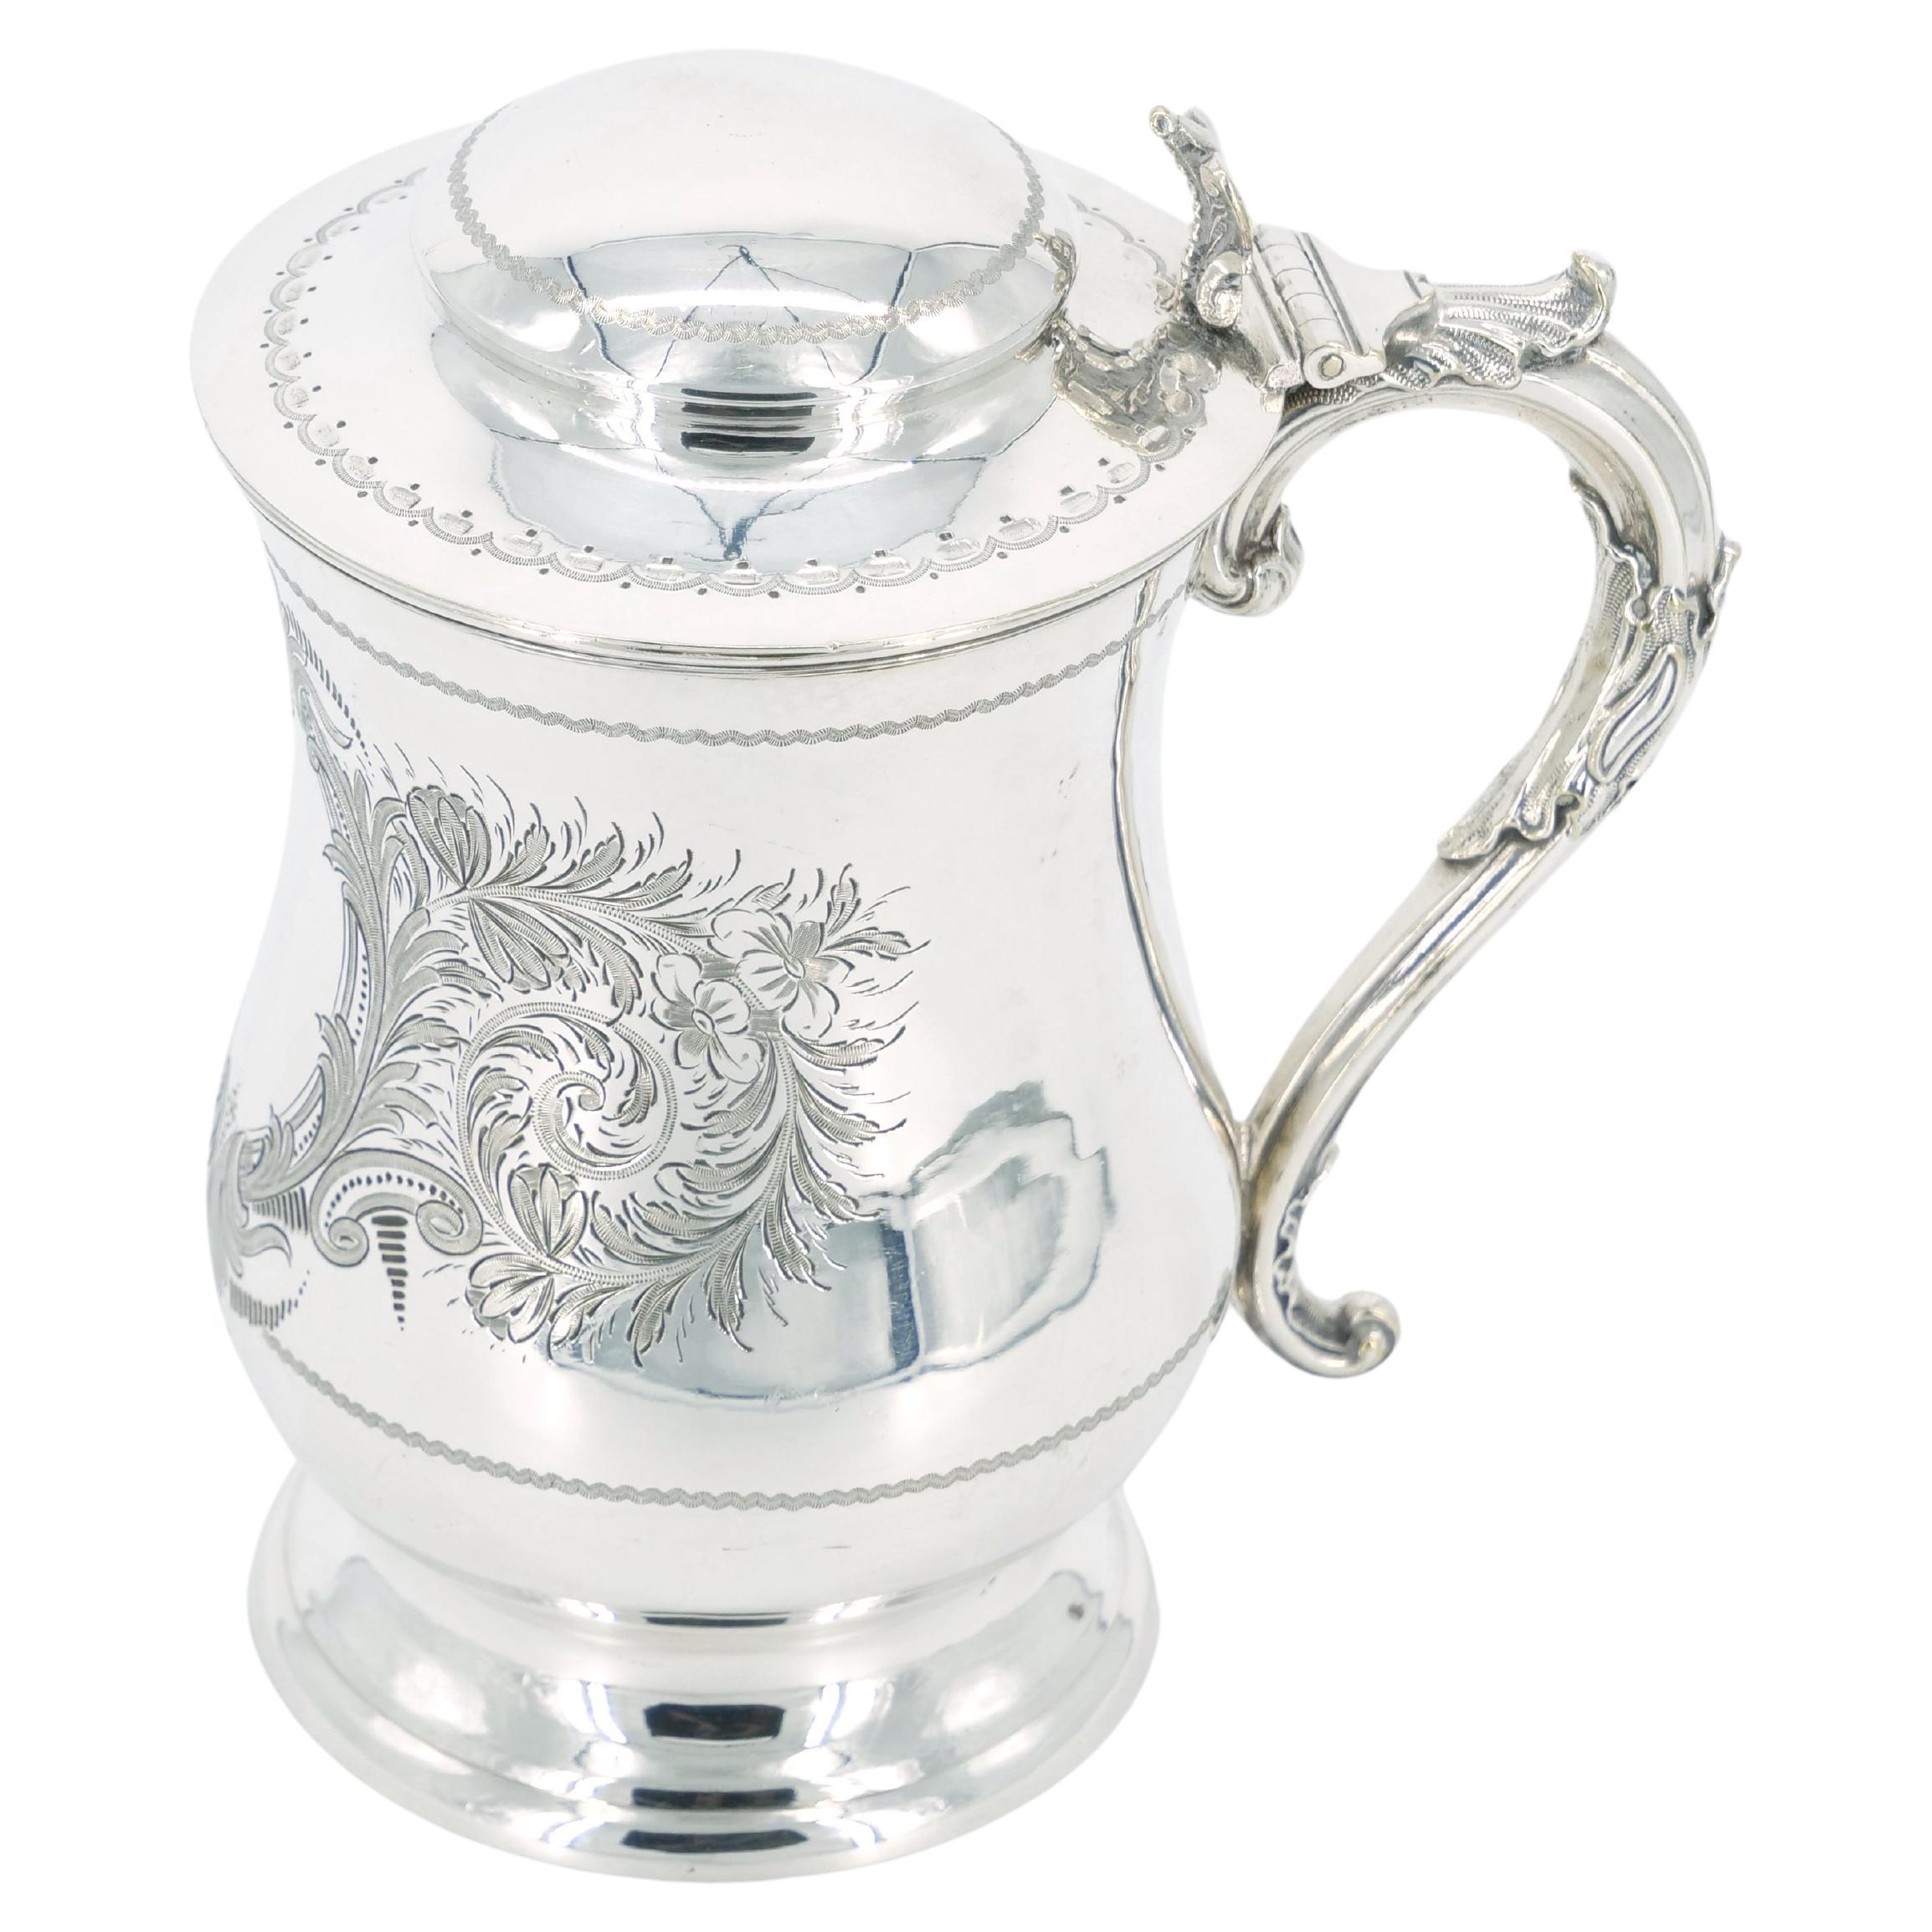 English Silver Plate Engraved Exterior Queen Anne Tankard For Sale